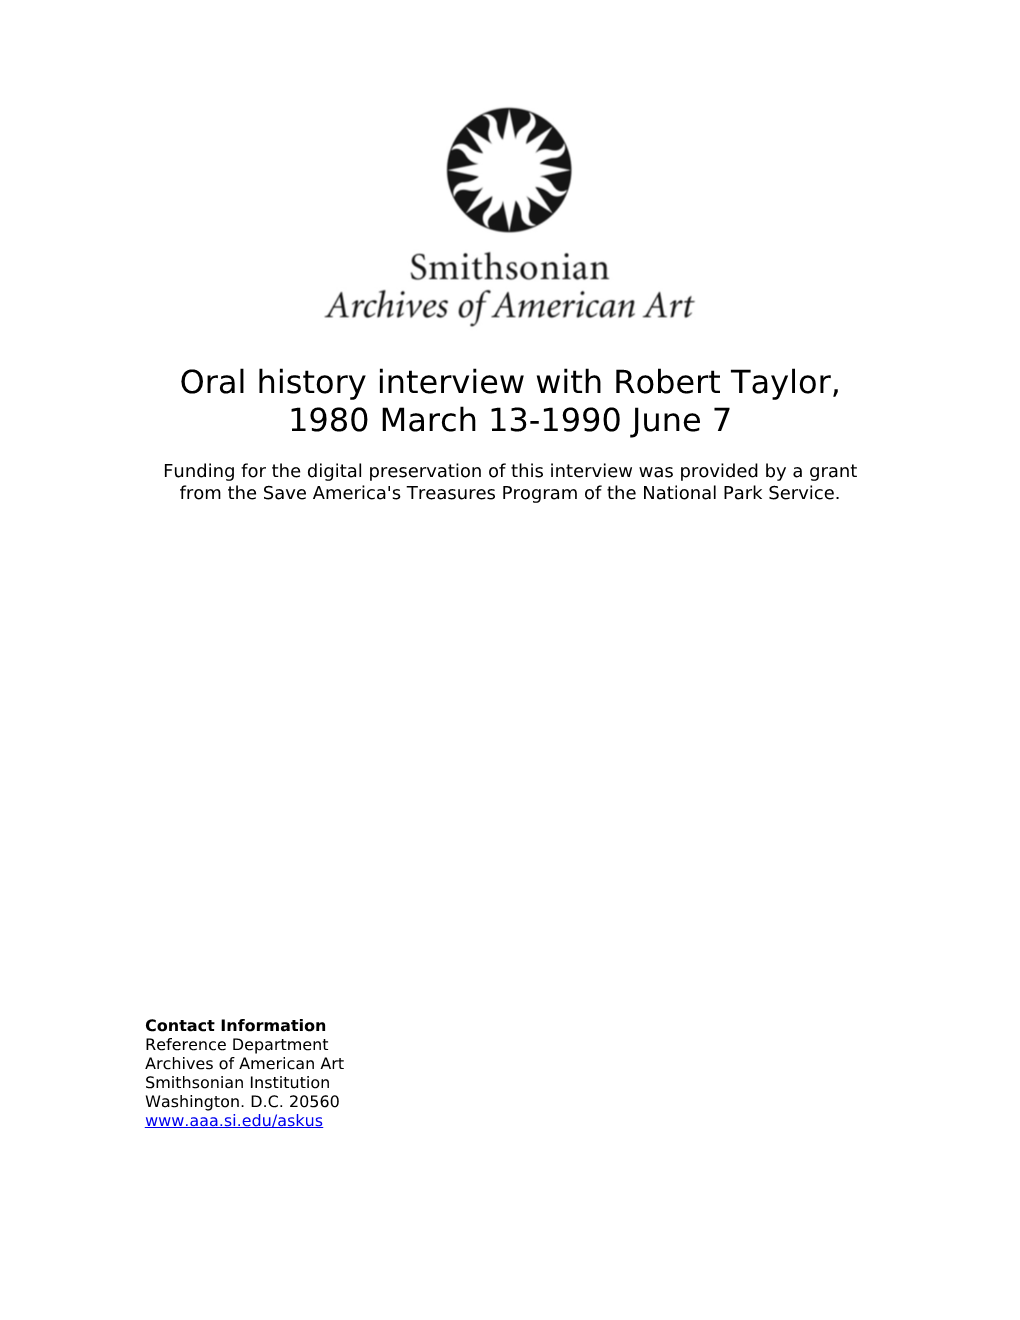 Oral History Interview with Robert Taylor, 1980 March 13-1990 June 7